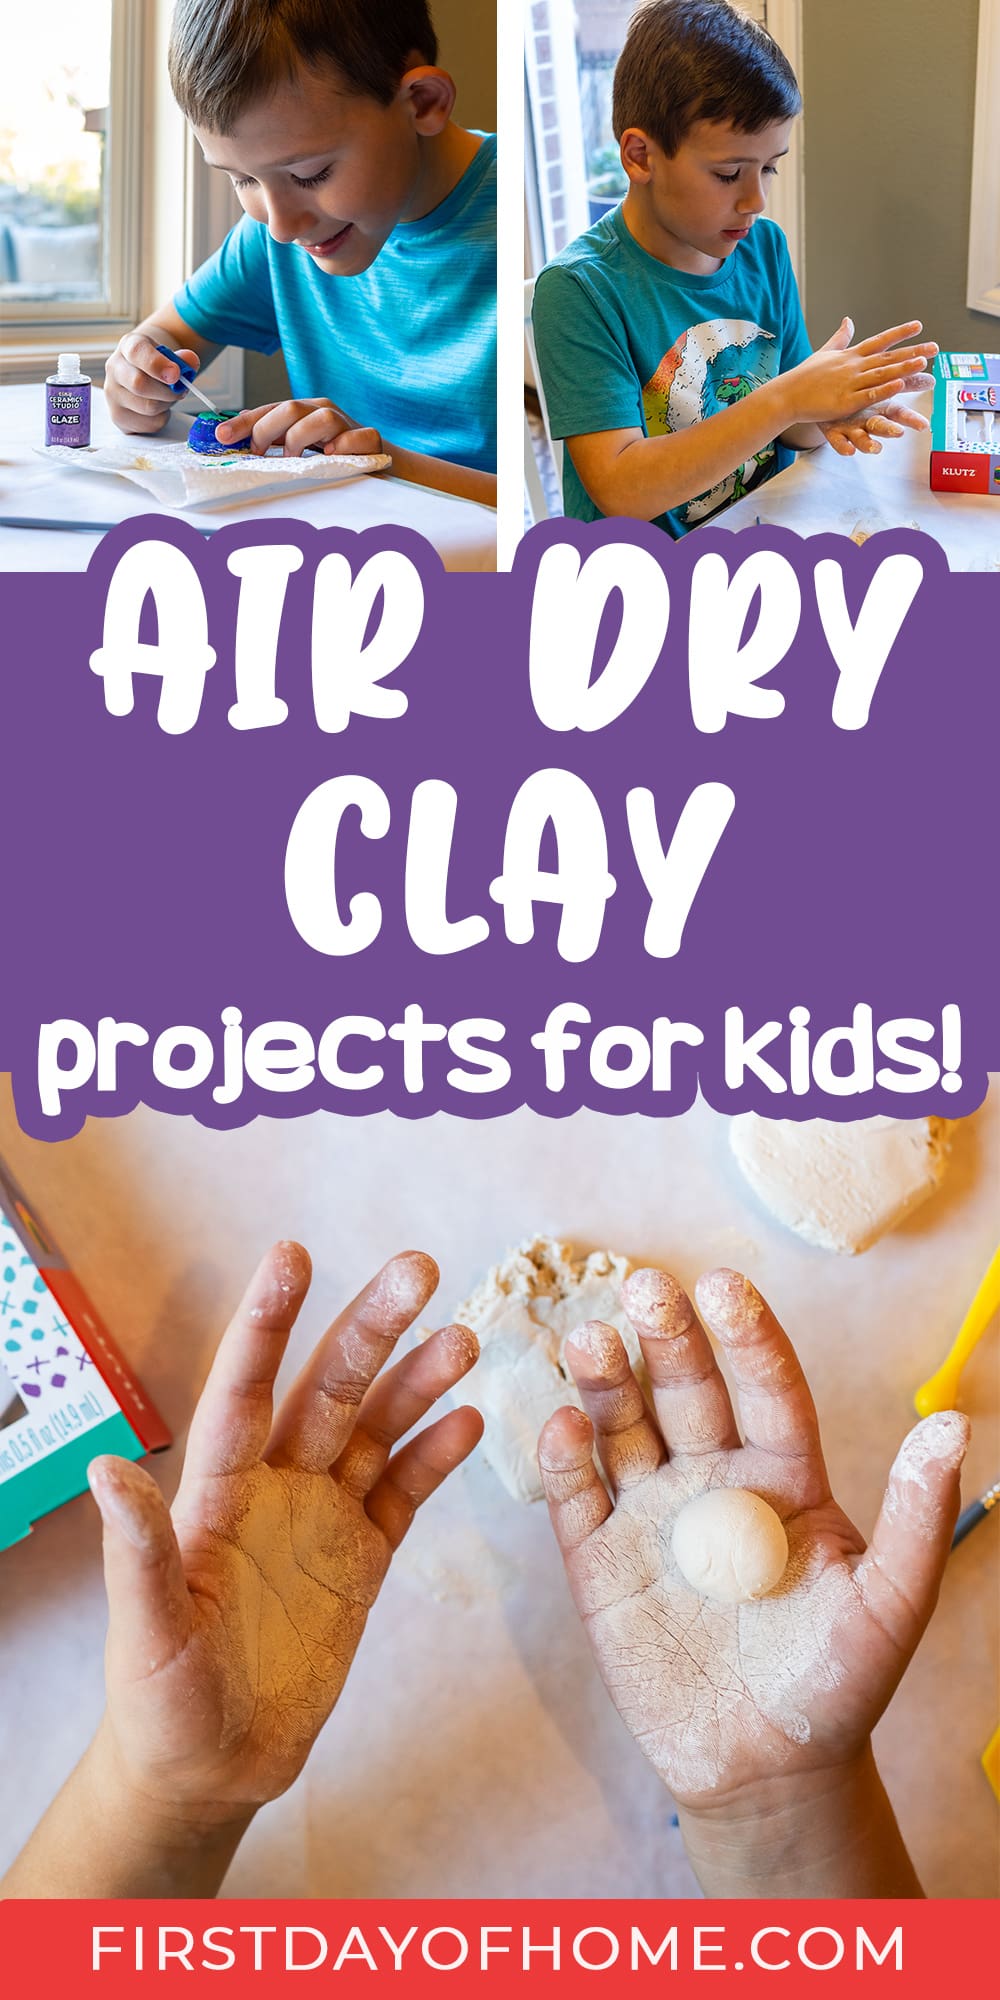 Collage of kids making air dry clay crafts using the Klutz Tiny Ceramics Studio